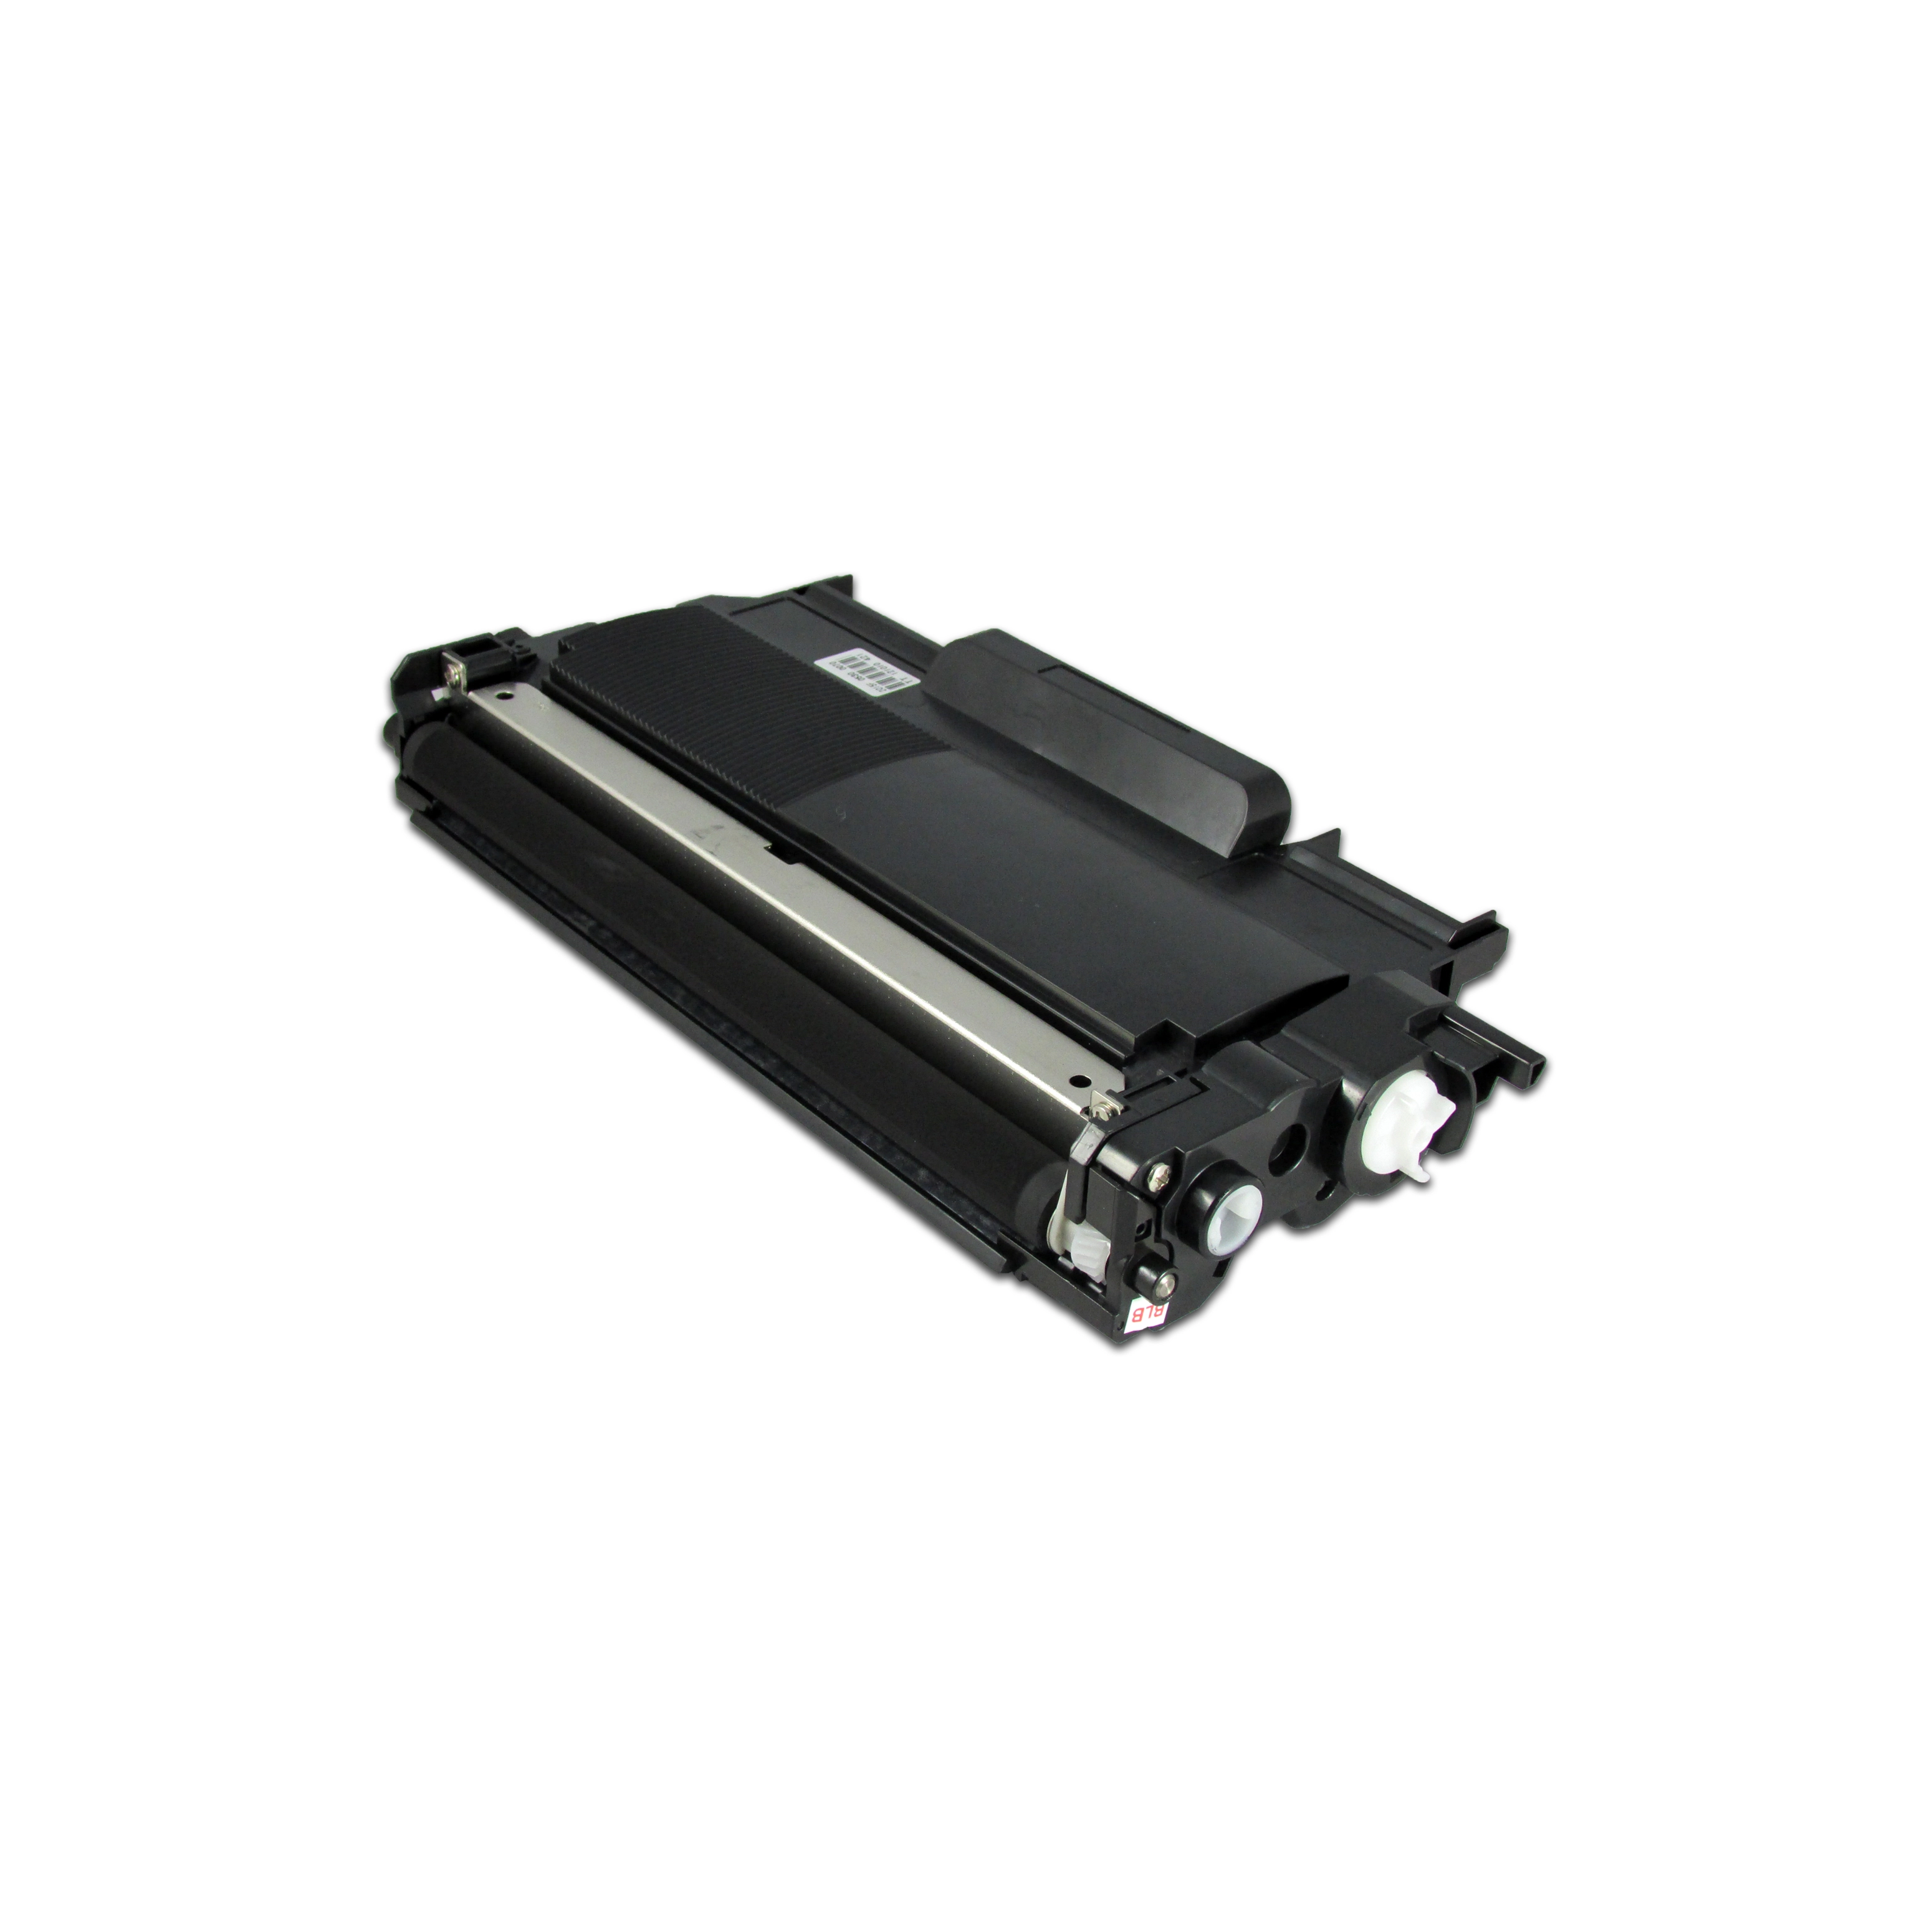 TN2015 toner cartridge Use For Brother HL-2130/DCP-7055.etc